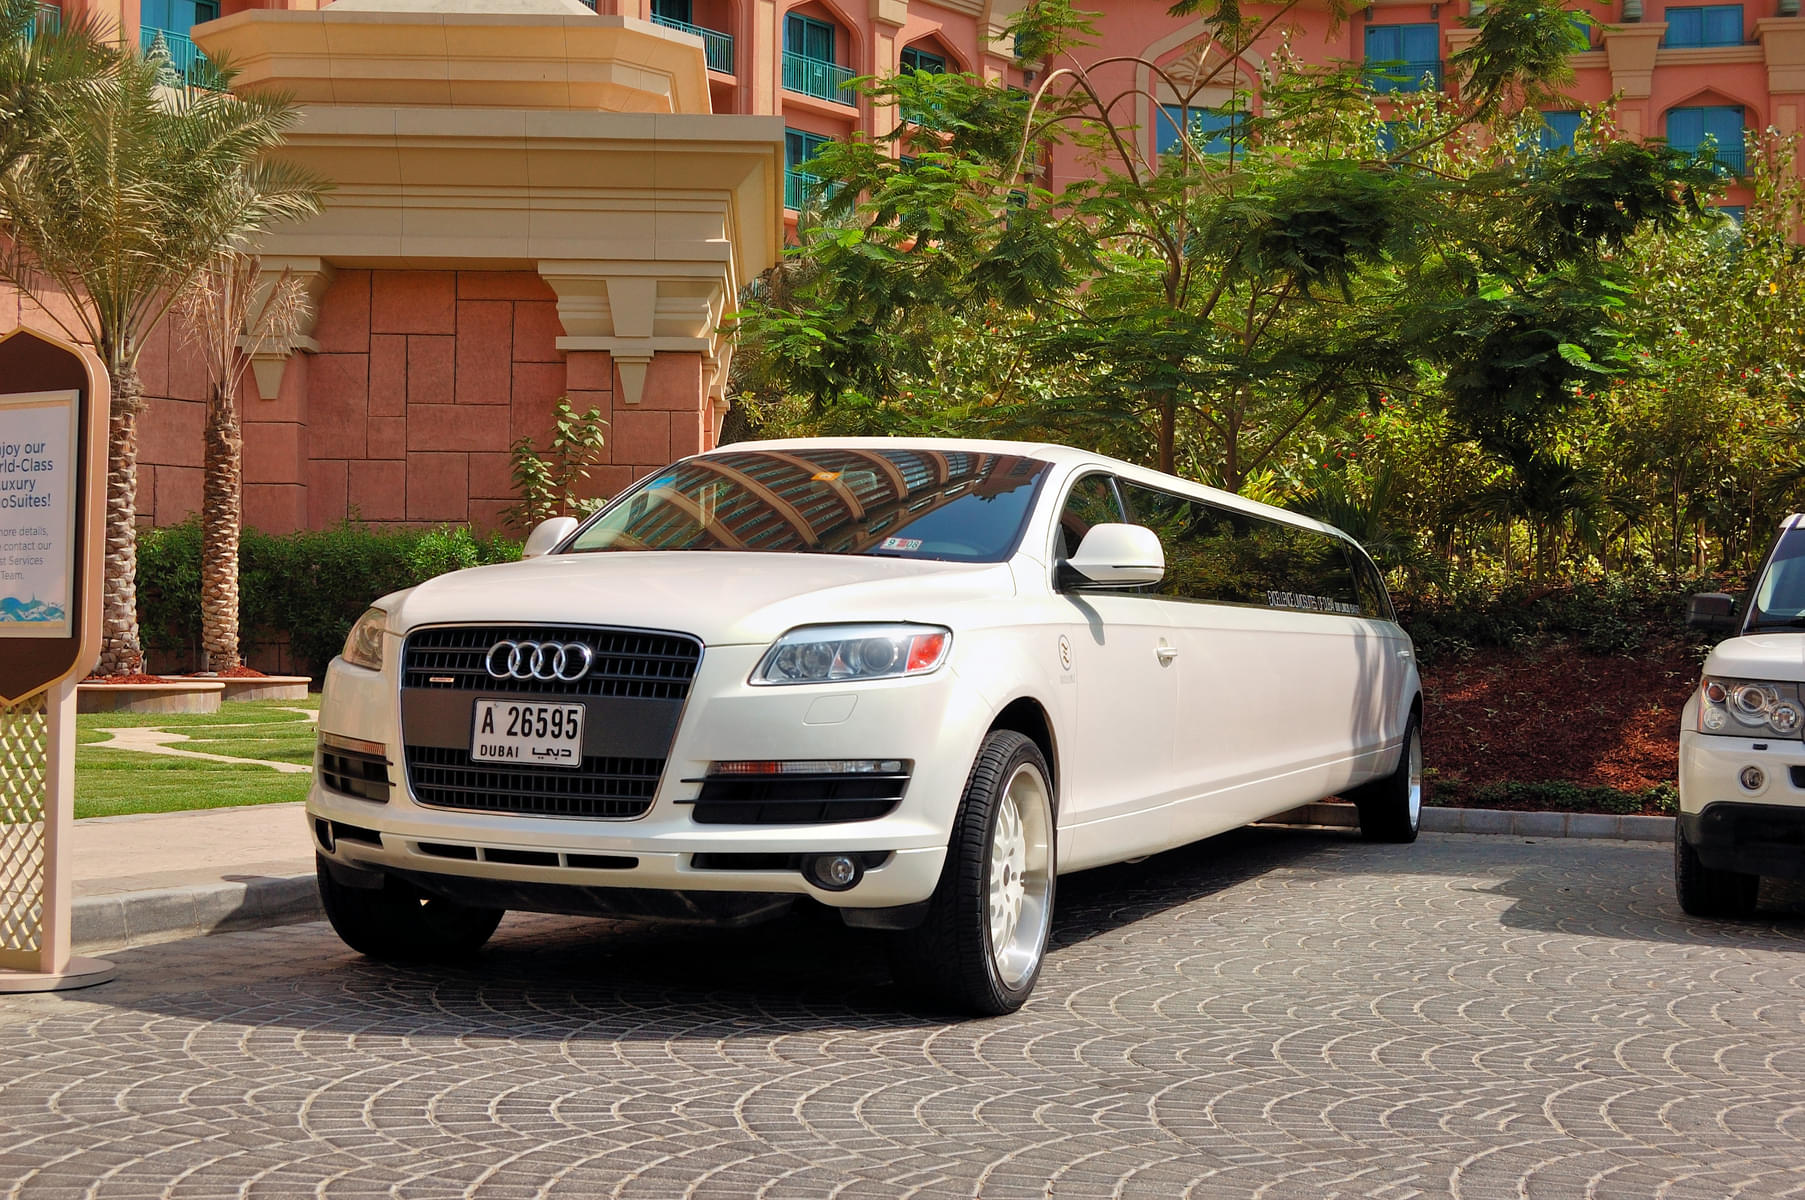 Get astonished by a 1 hour Limousine ride in Dubai